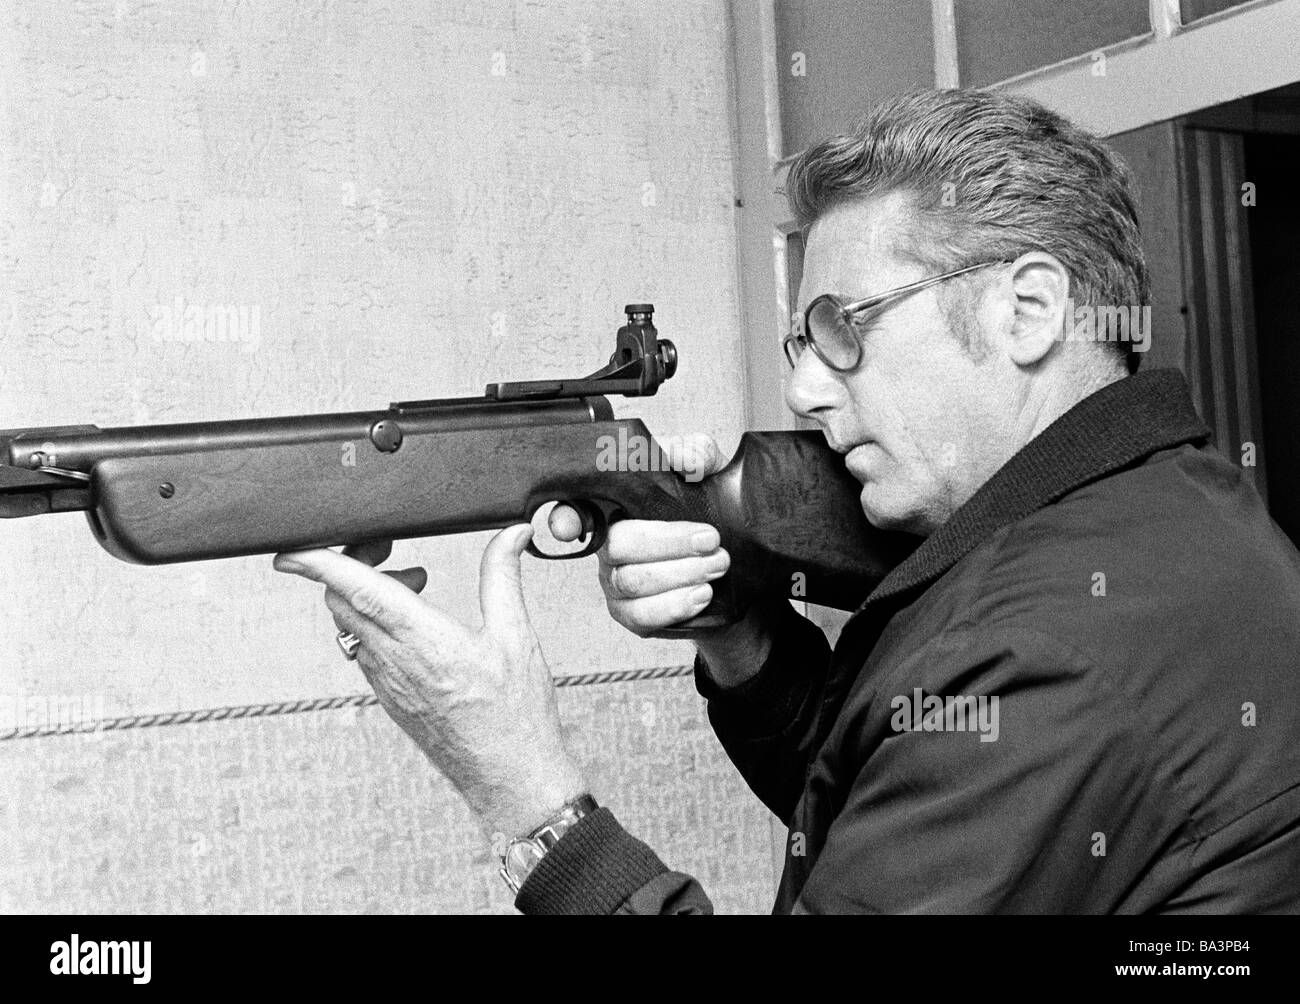 Seventies, black and white photo, sports, shooting sport, shooting stand, shooter with gun, man, aged 30 to 40 years, Ruhr area, North Rhine-Westphalia Stock Photo